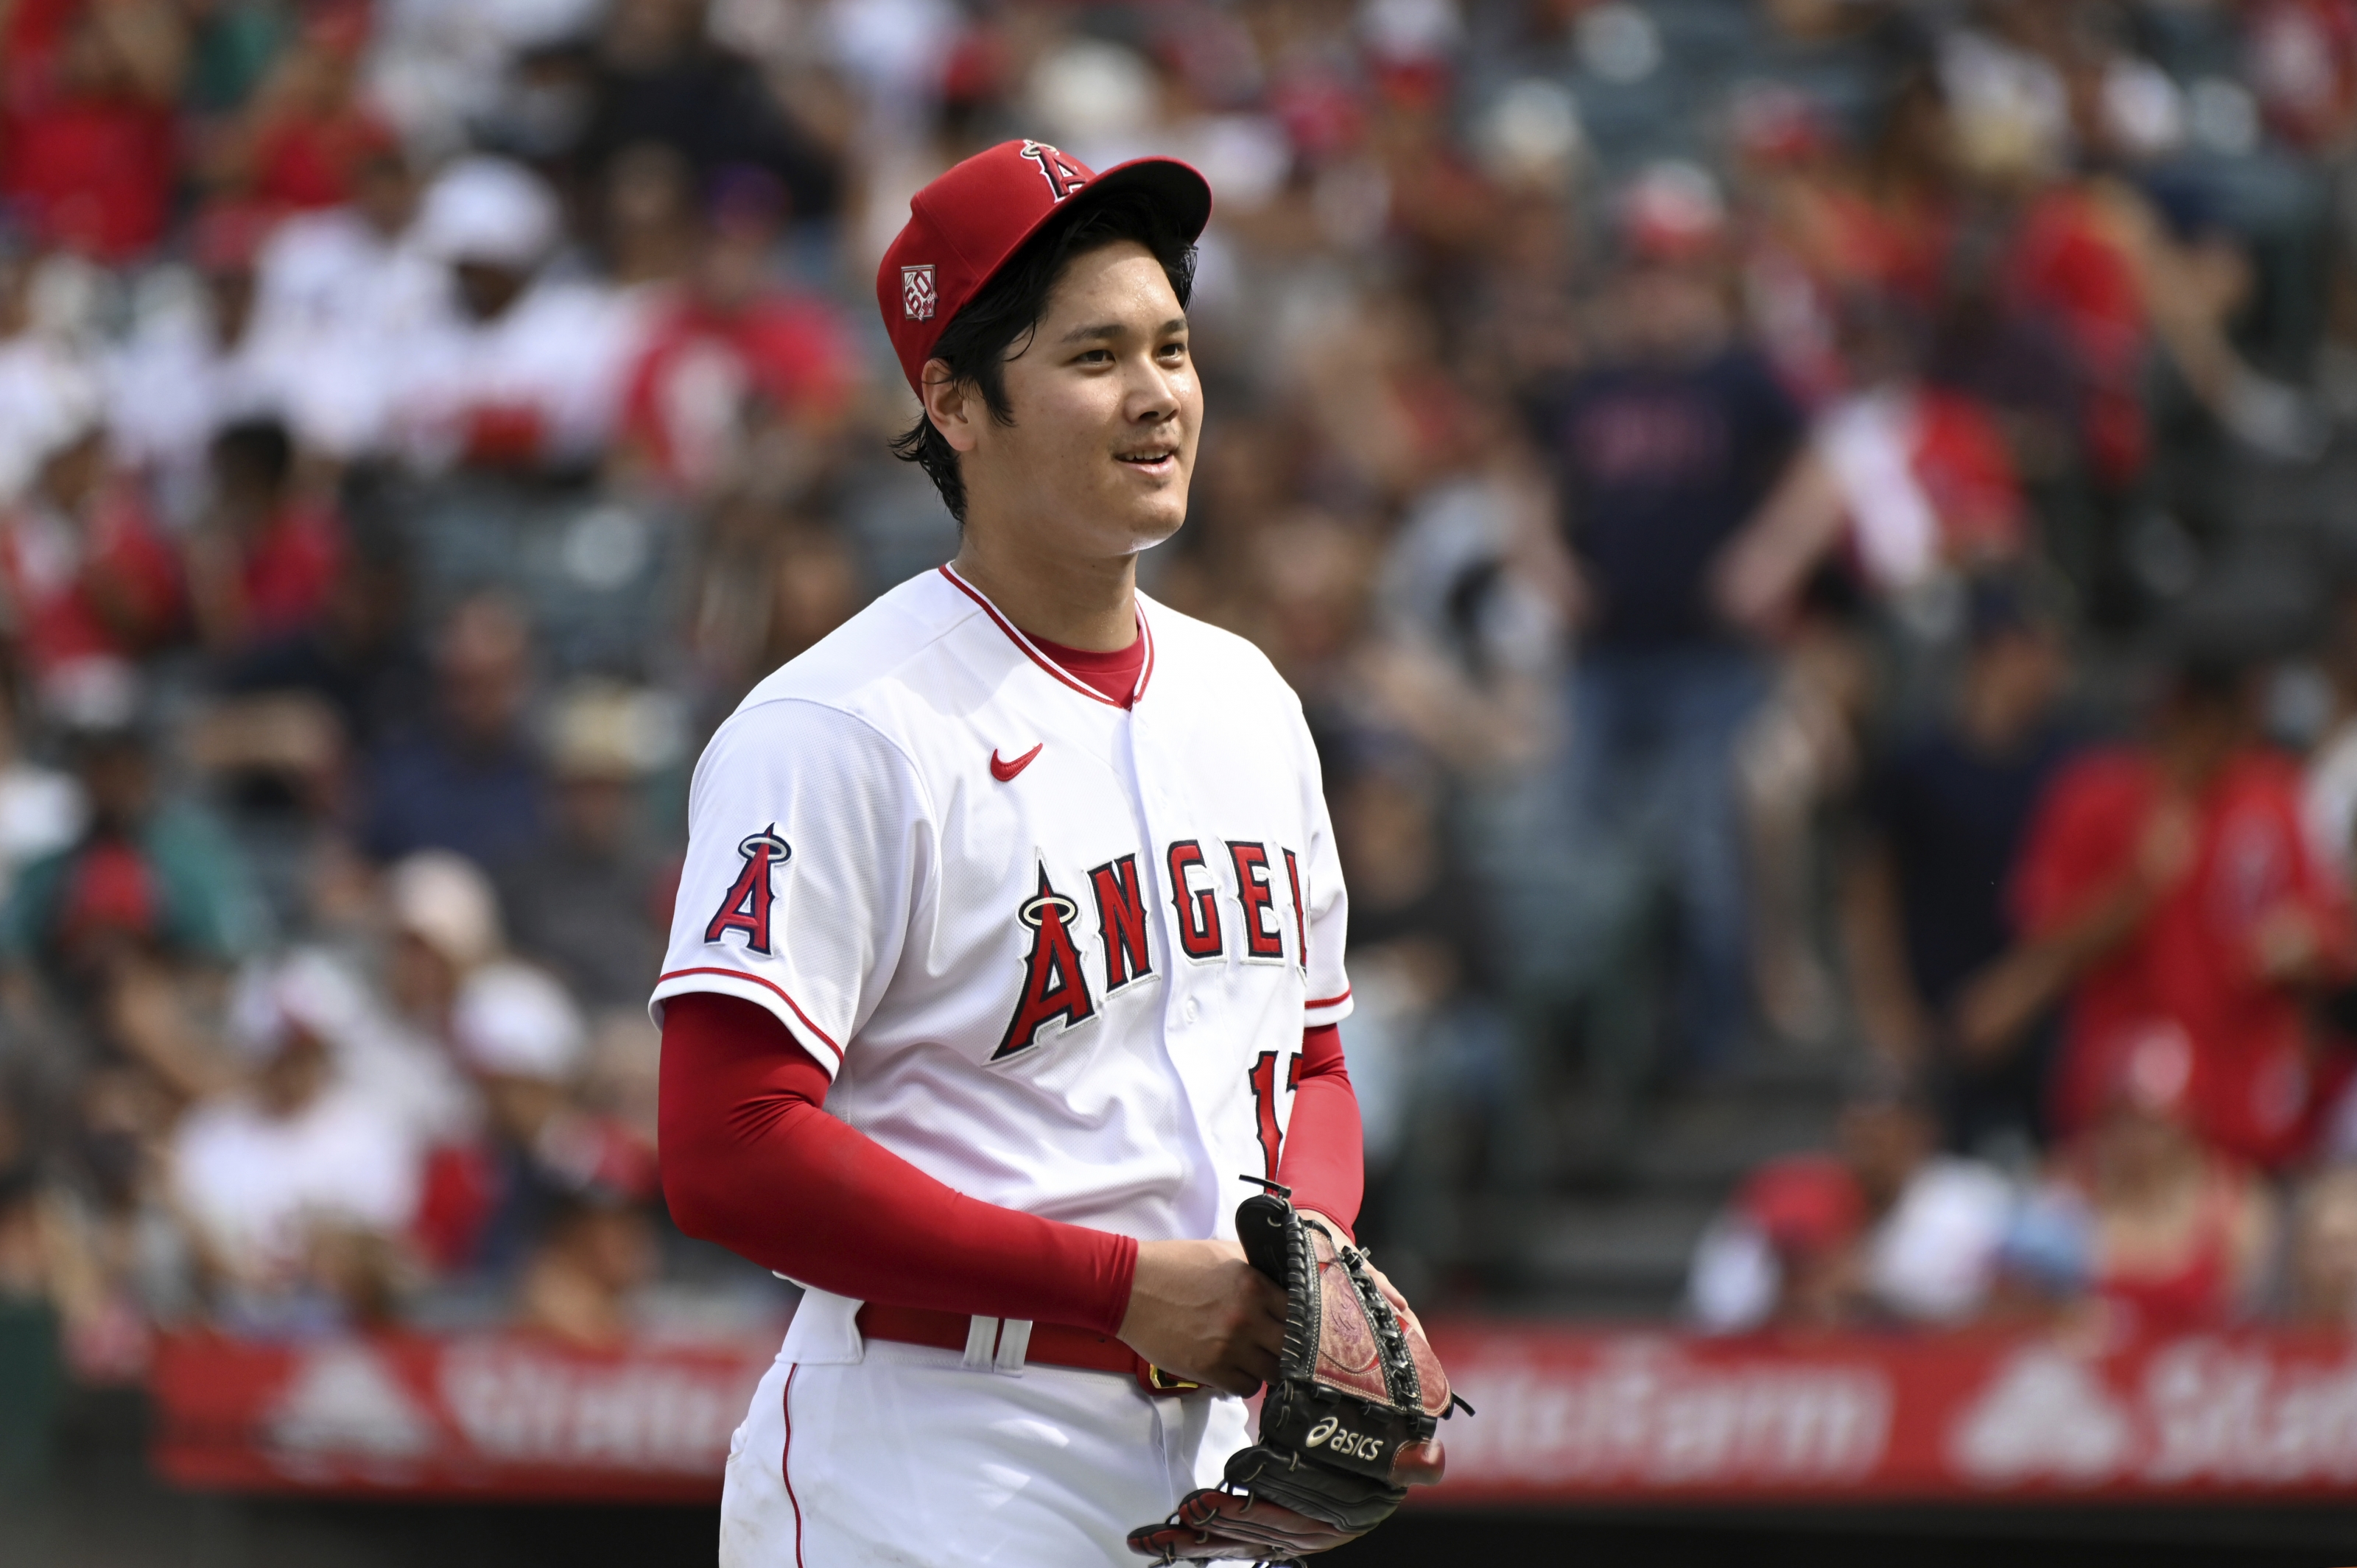 Ohtani bids farewell to Japan fans ahead of Los Angeles Angels